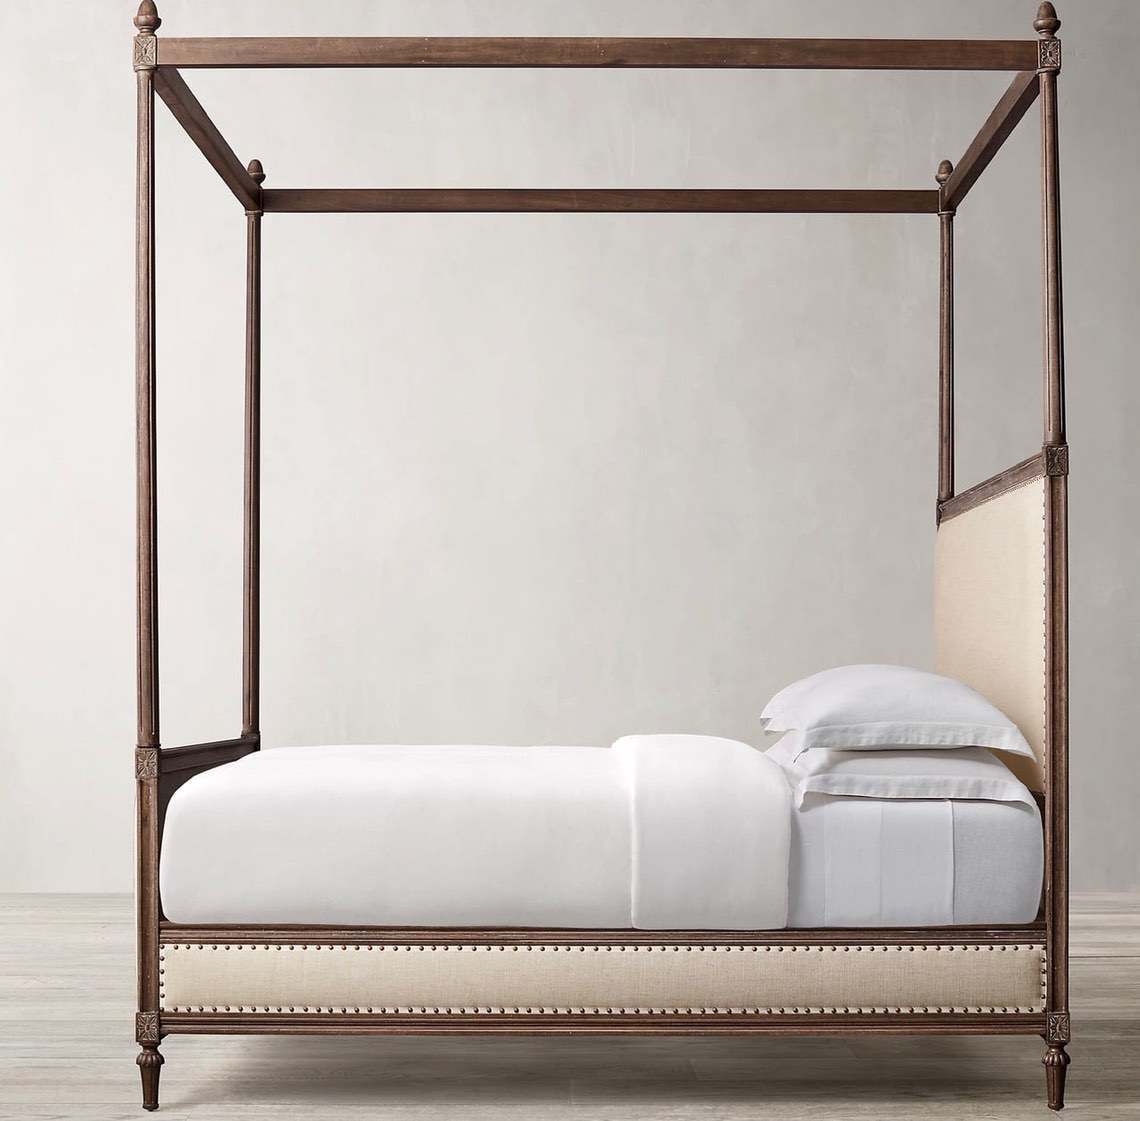 Made to Order Bedroom Furniture. - Four Poster 045-01